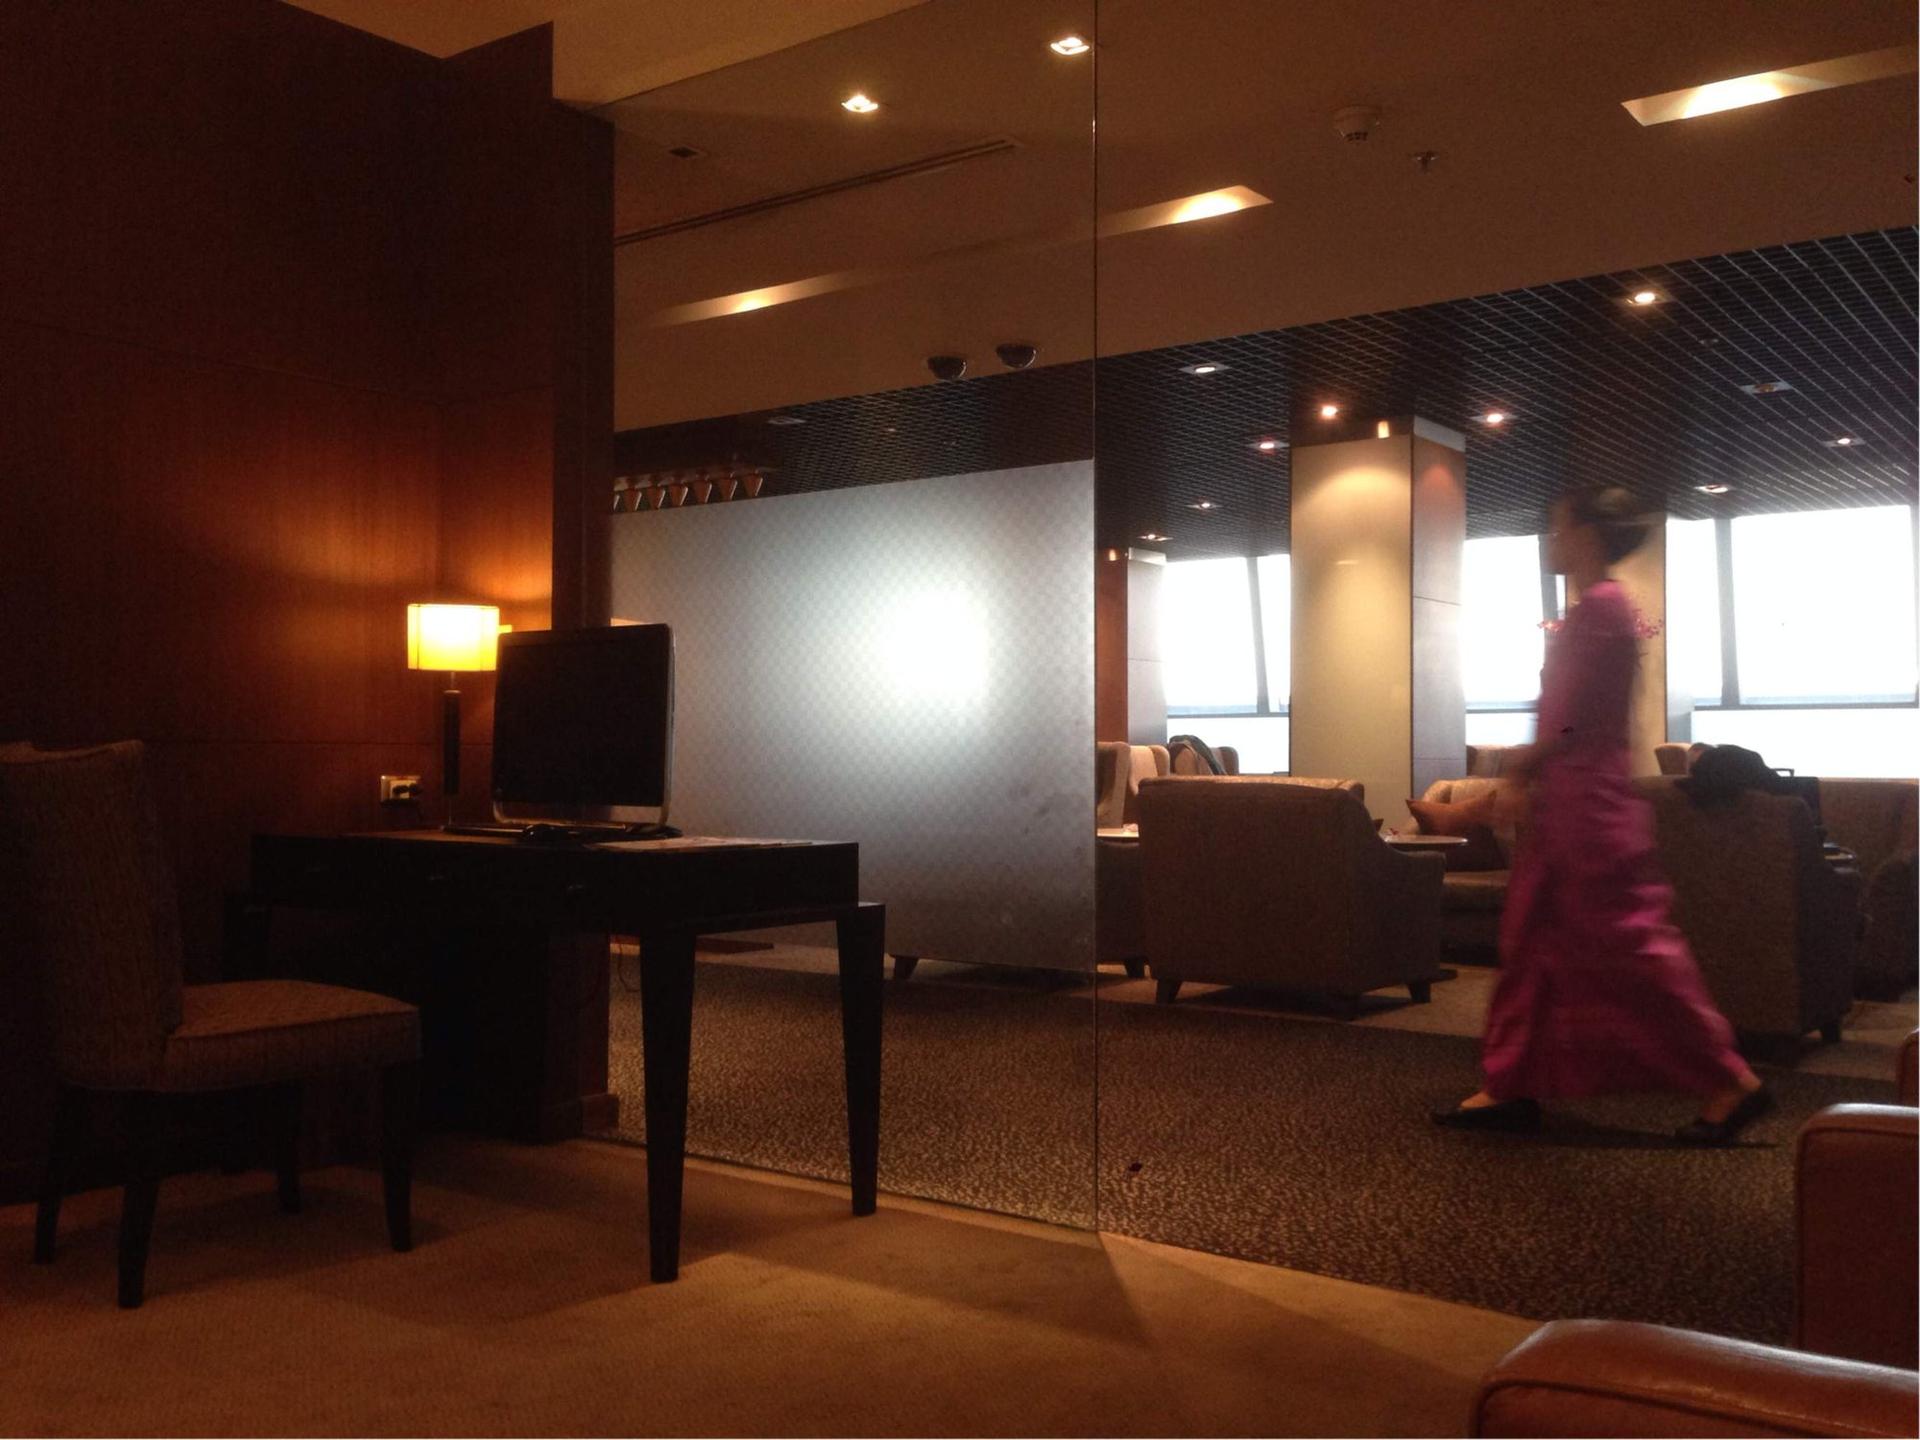 Thai Airways Royal First Class Lounge image 7 of 44